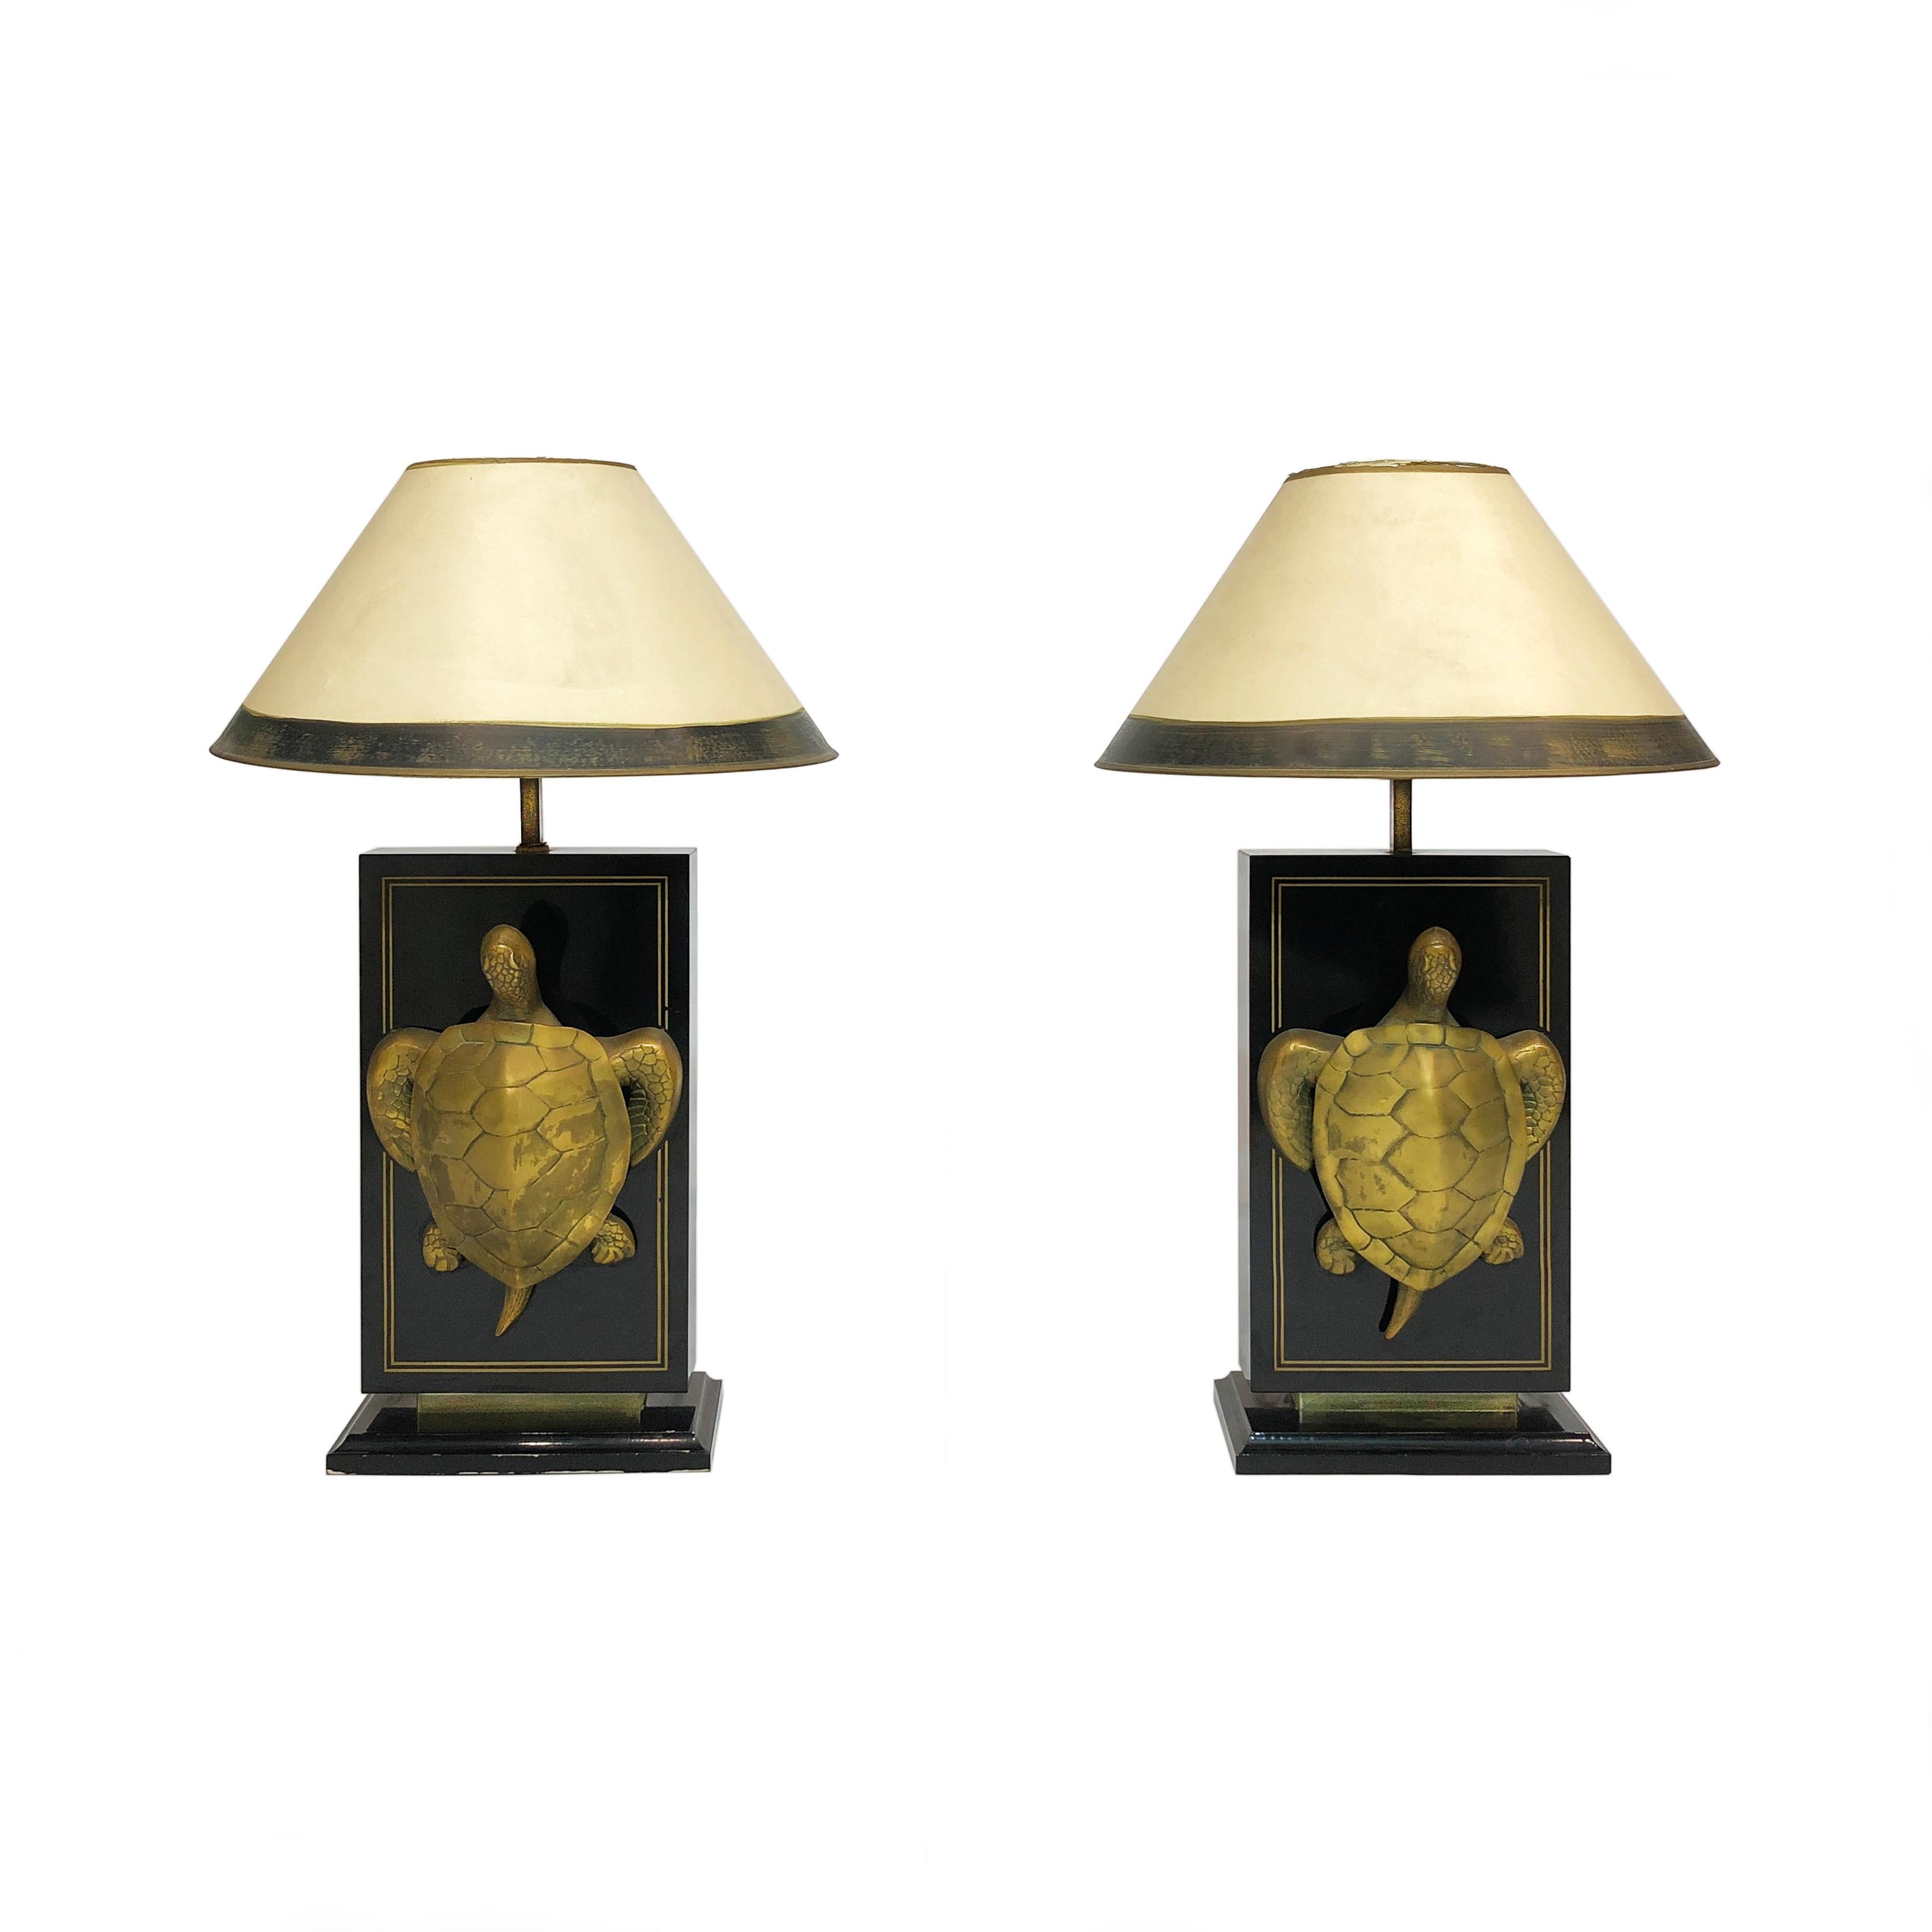 This pair of visually striking brass table lamps depict the protected sea turtle of the French overseas colony Martinique. Stamped “Macouba” on the bottom, the lamp itself is an elegant rectangle of black lacquered veneer, from which protrudes a